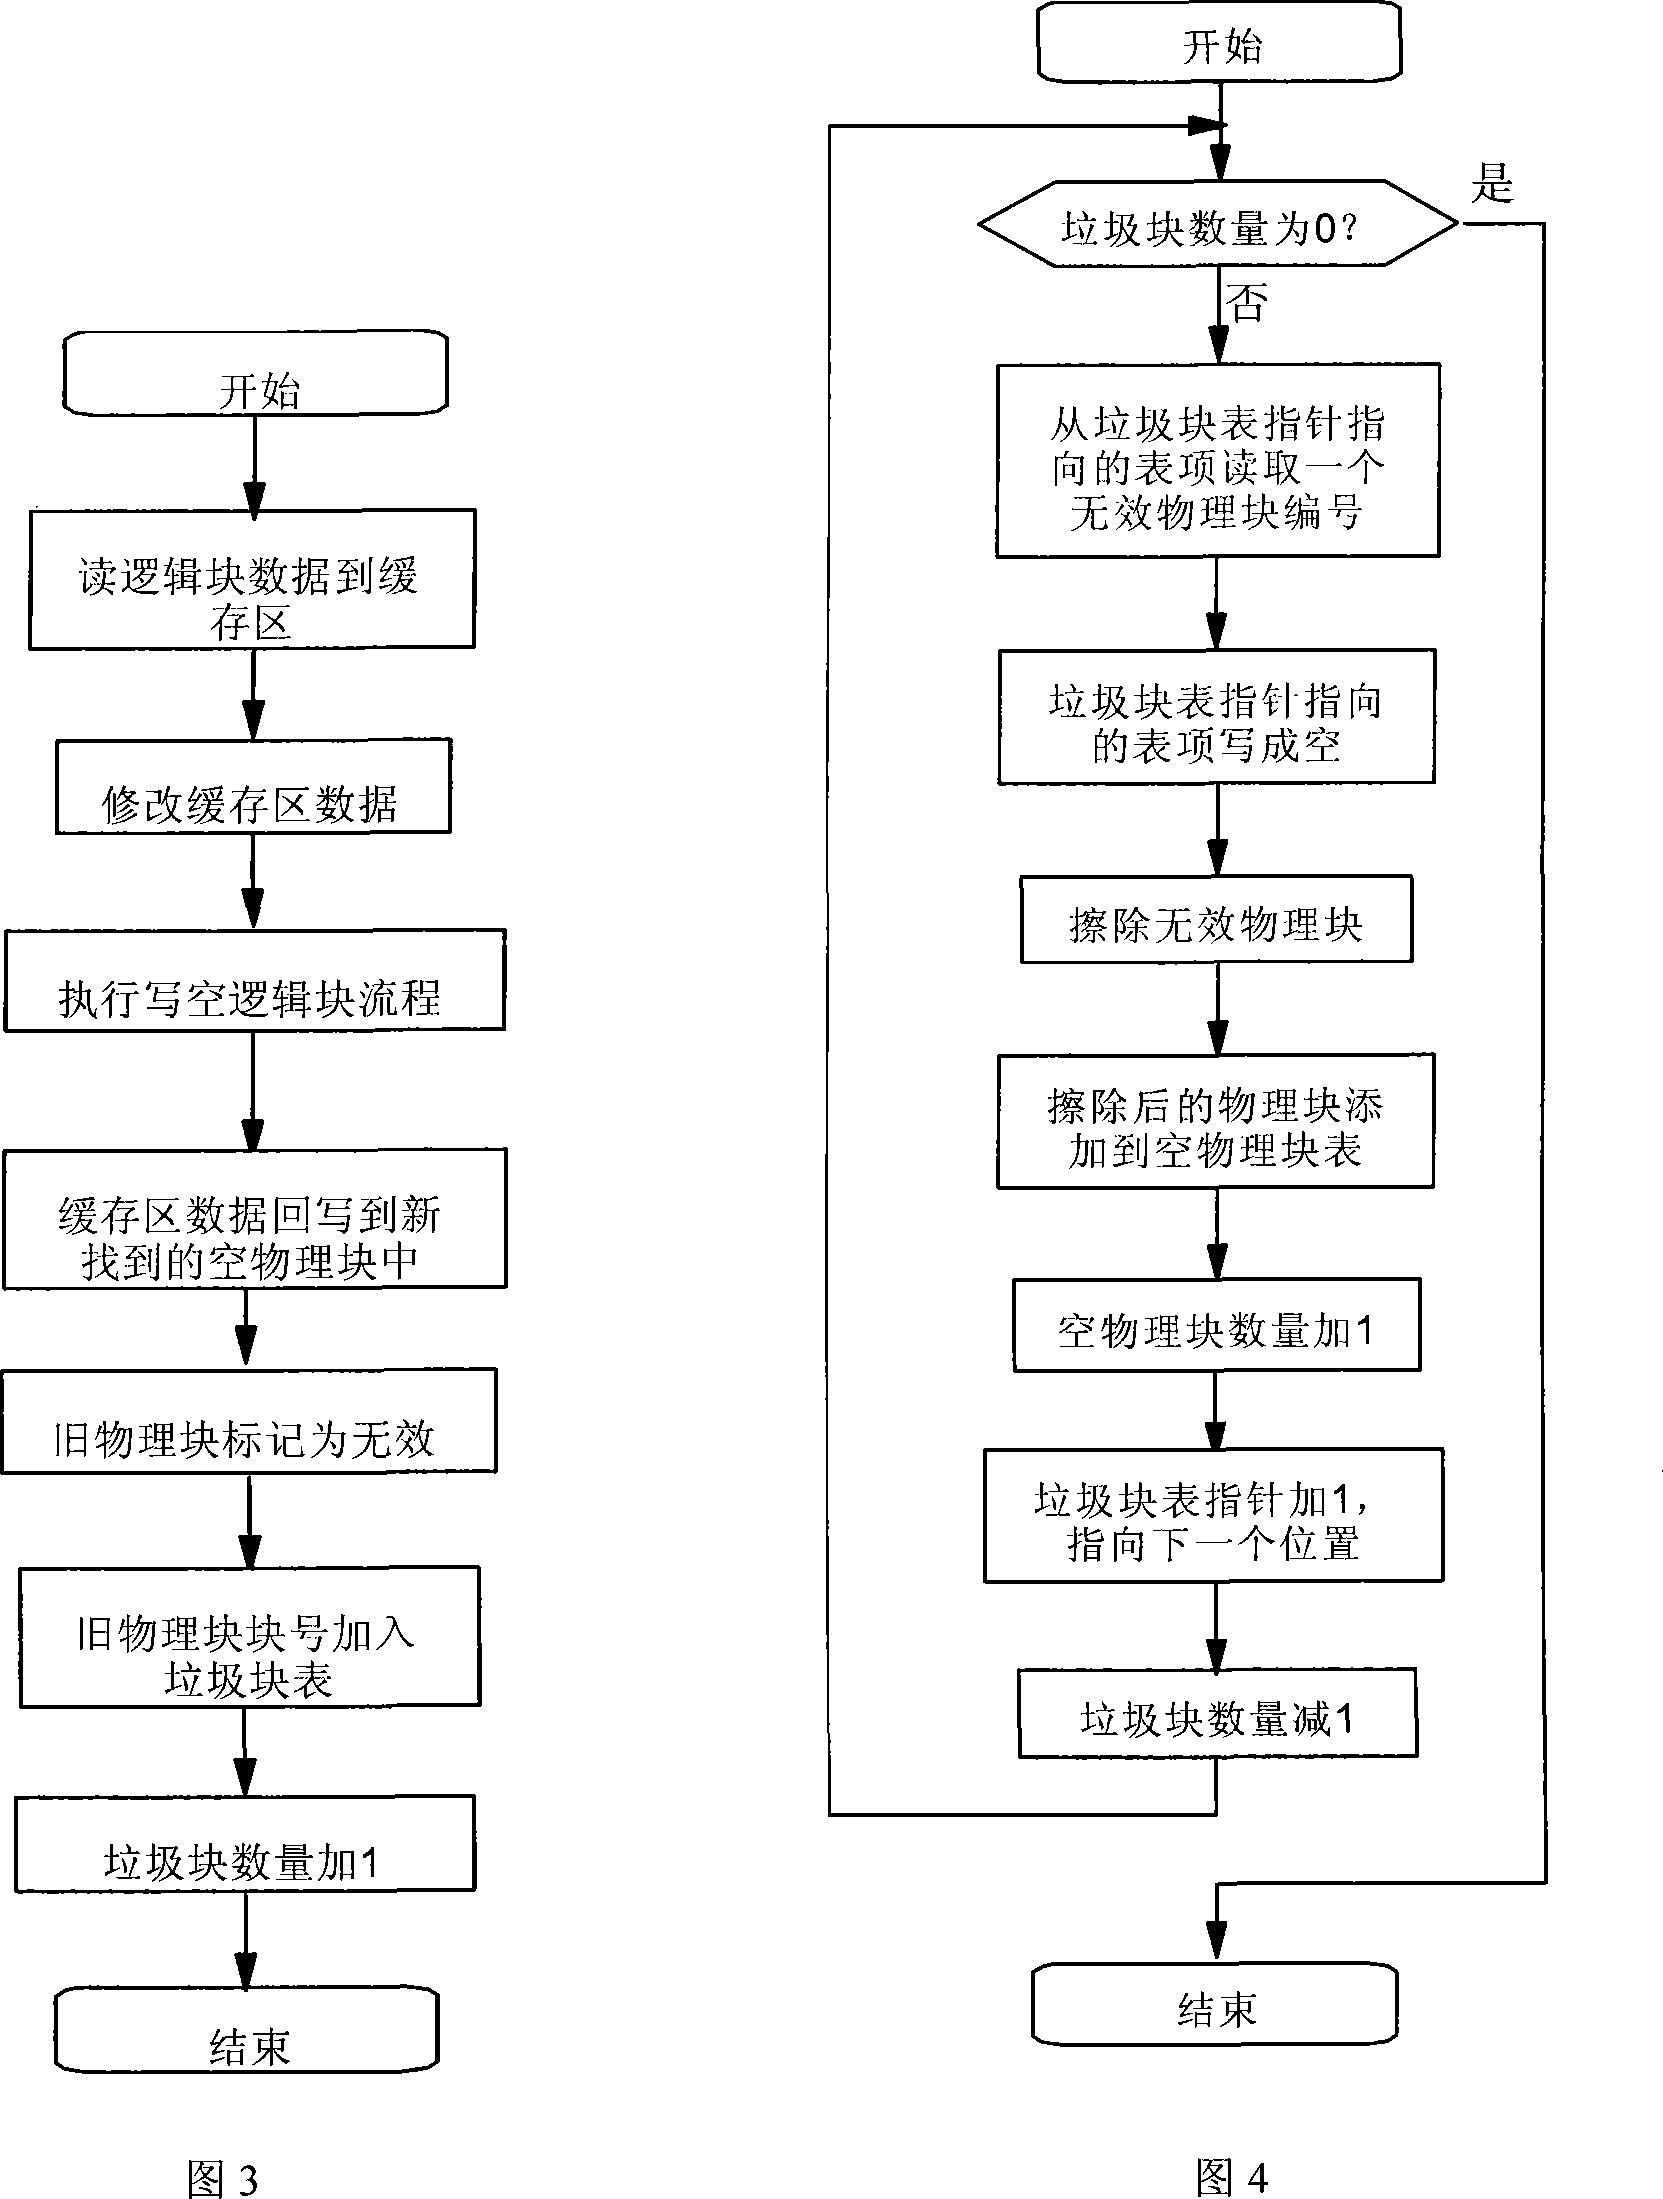 Dynamic state management techniques of NAND flash memory